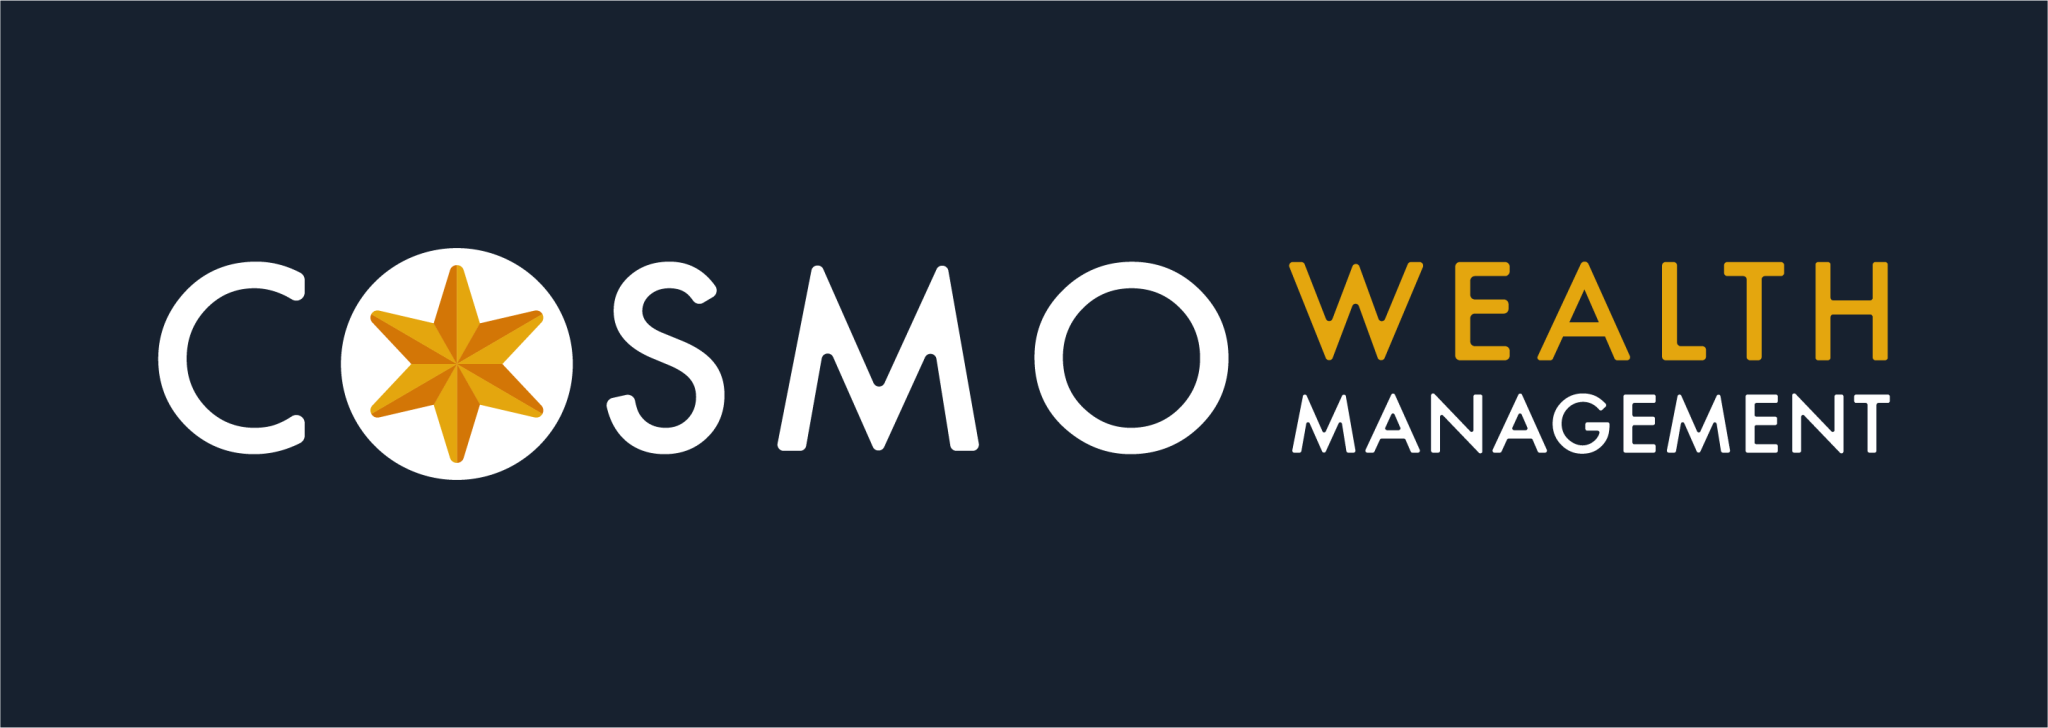 Cosmo Wealth Management